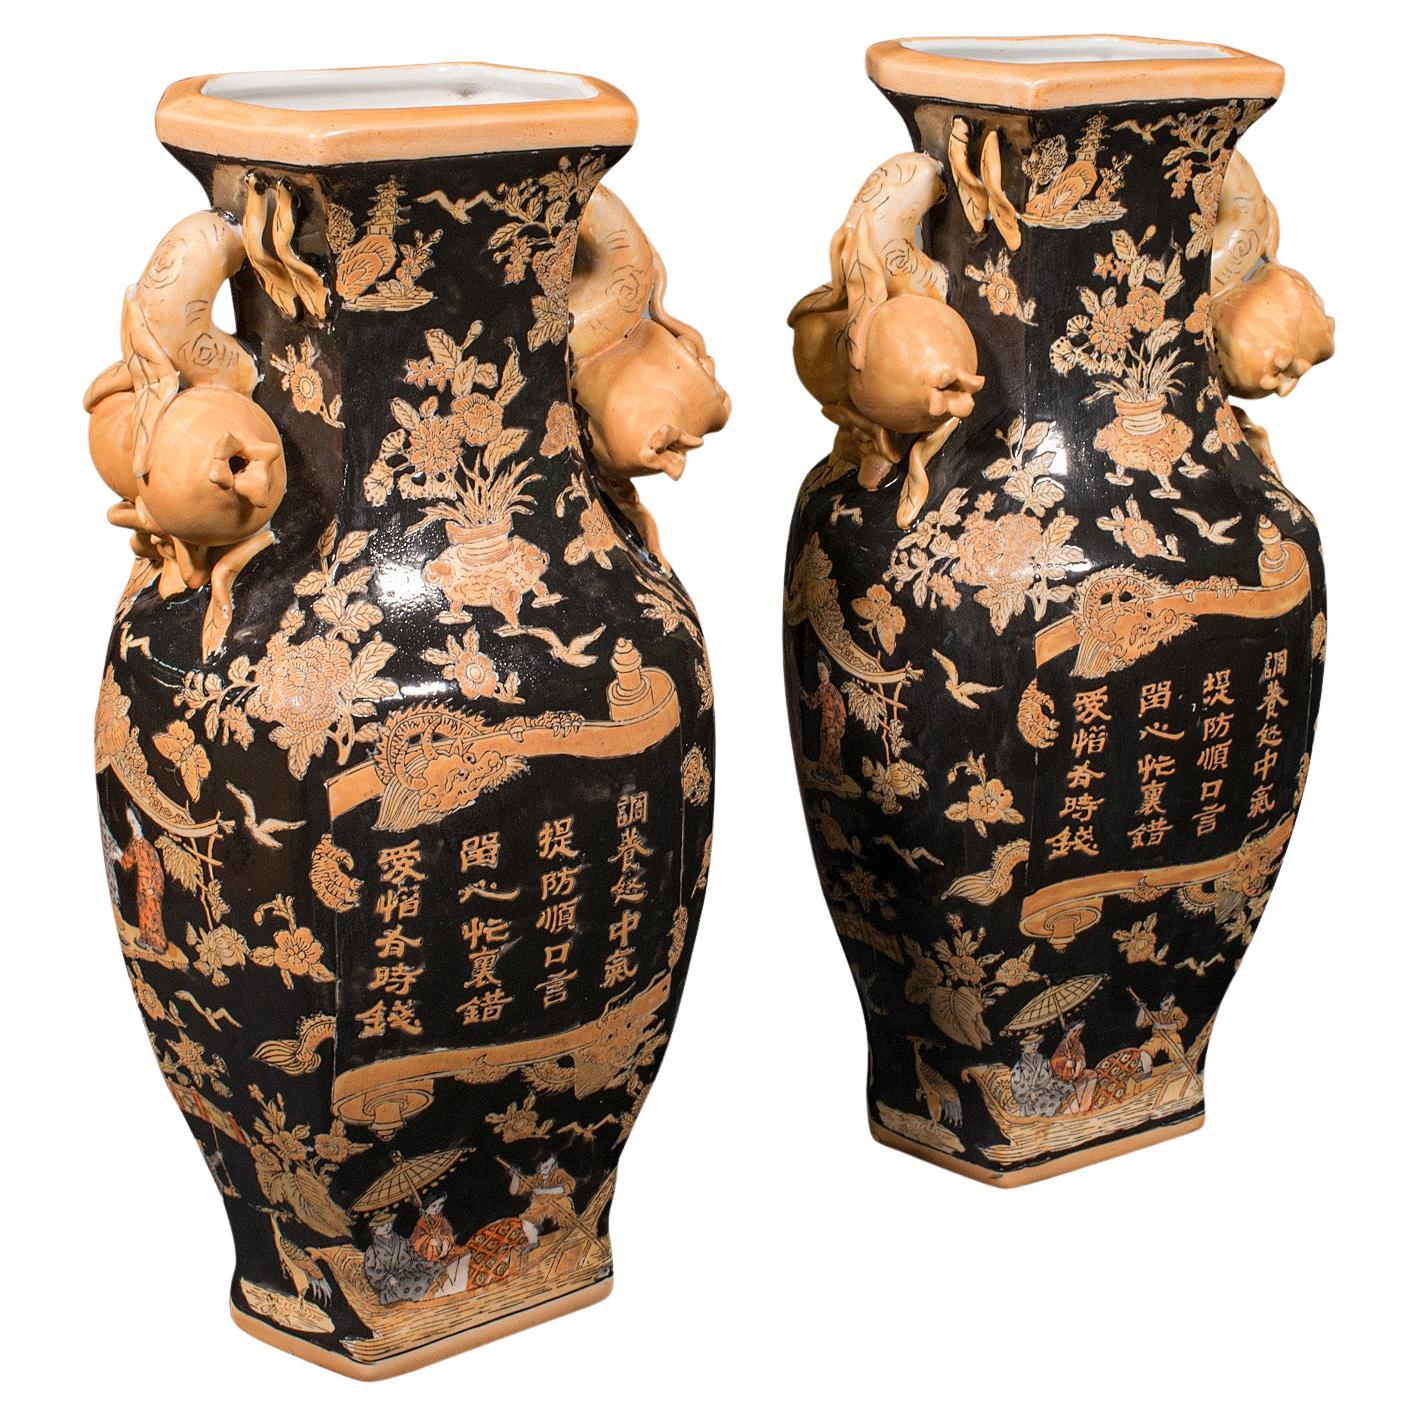 Pair of Vintage Decorative Vases, Chinese, Ceramic, Dried Flower Urn, Late 20th